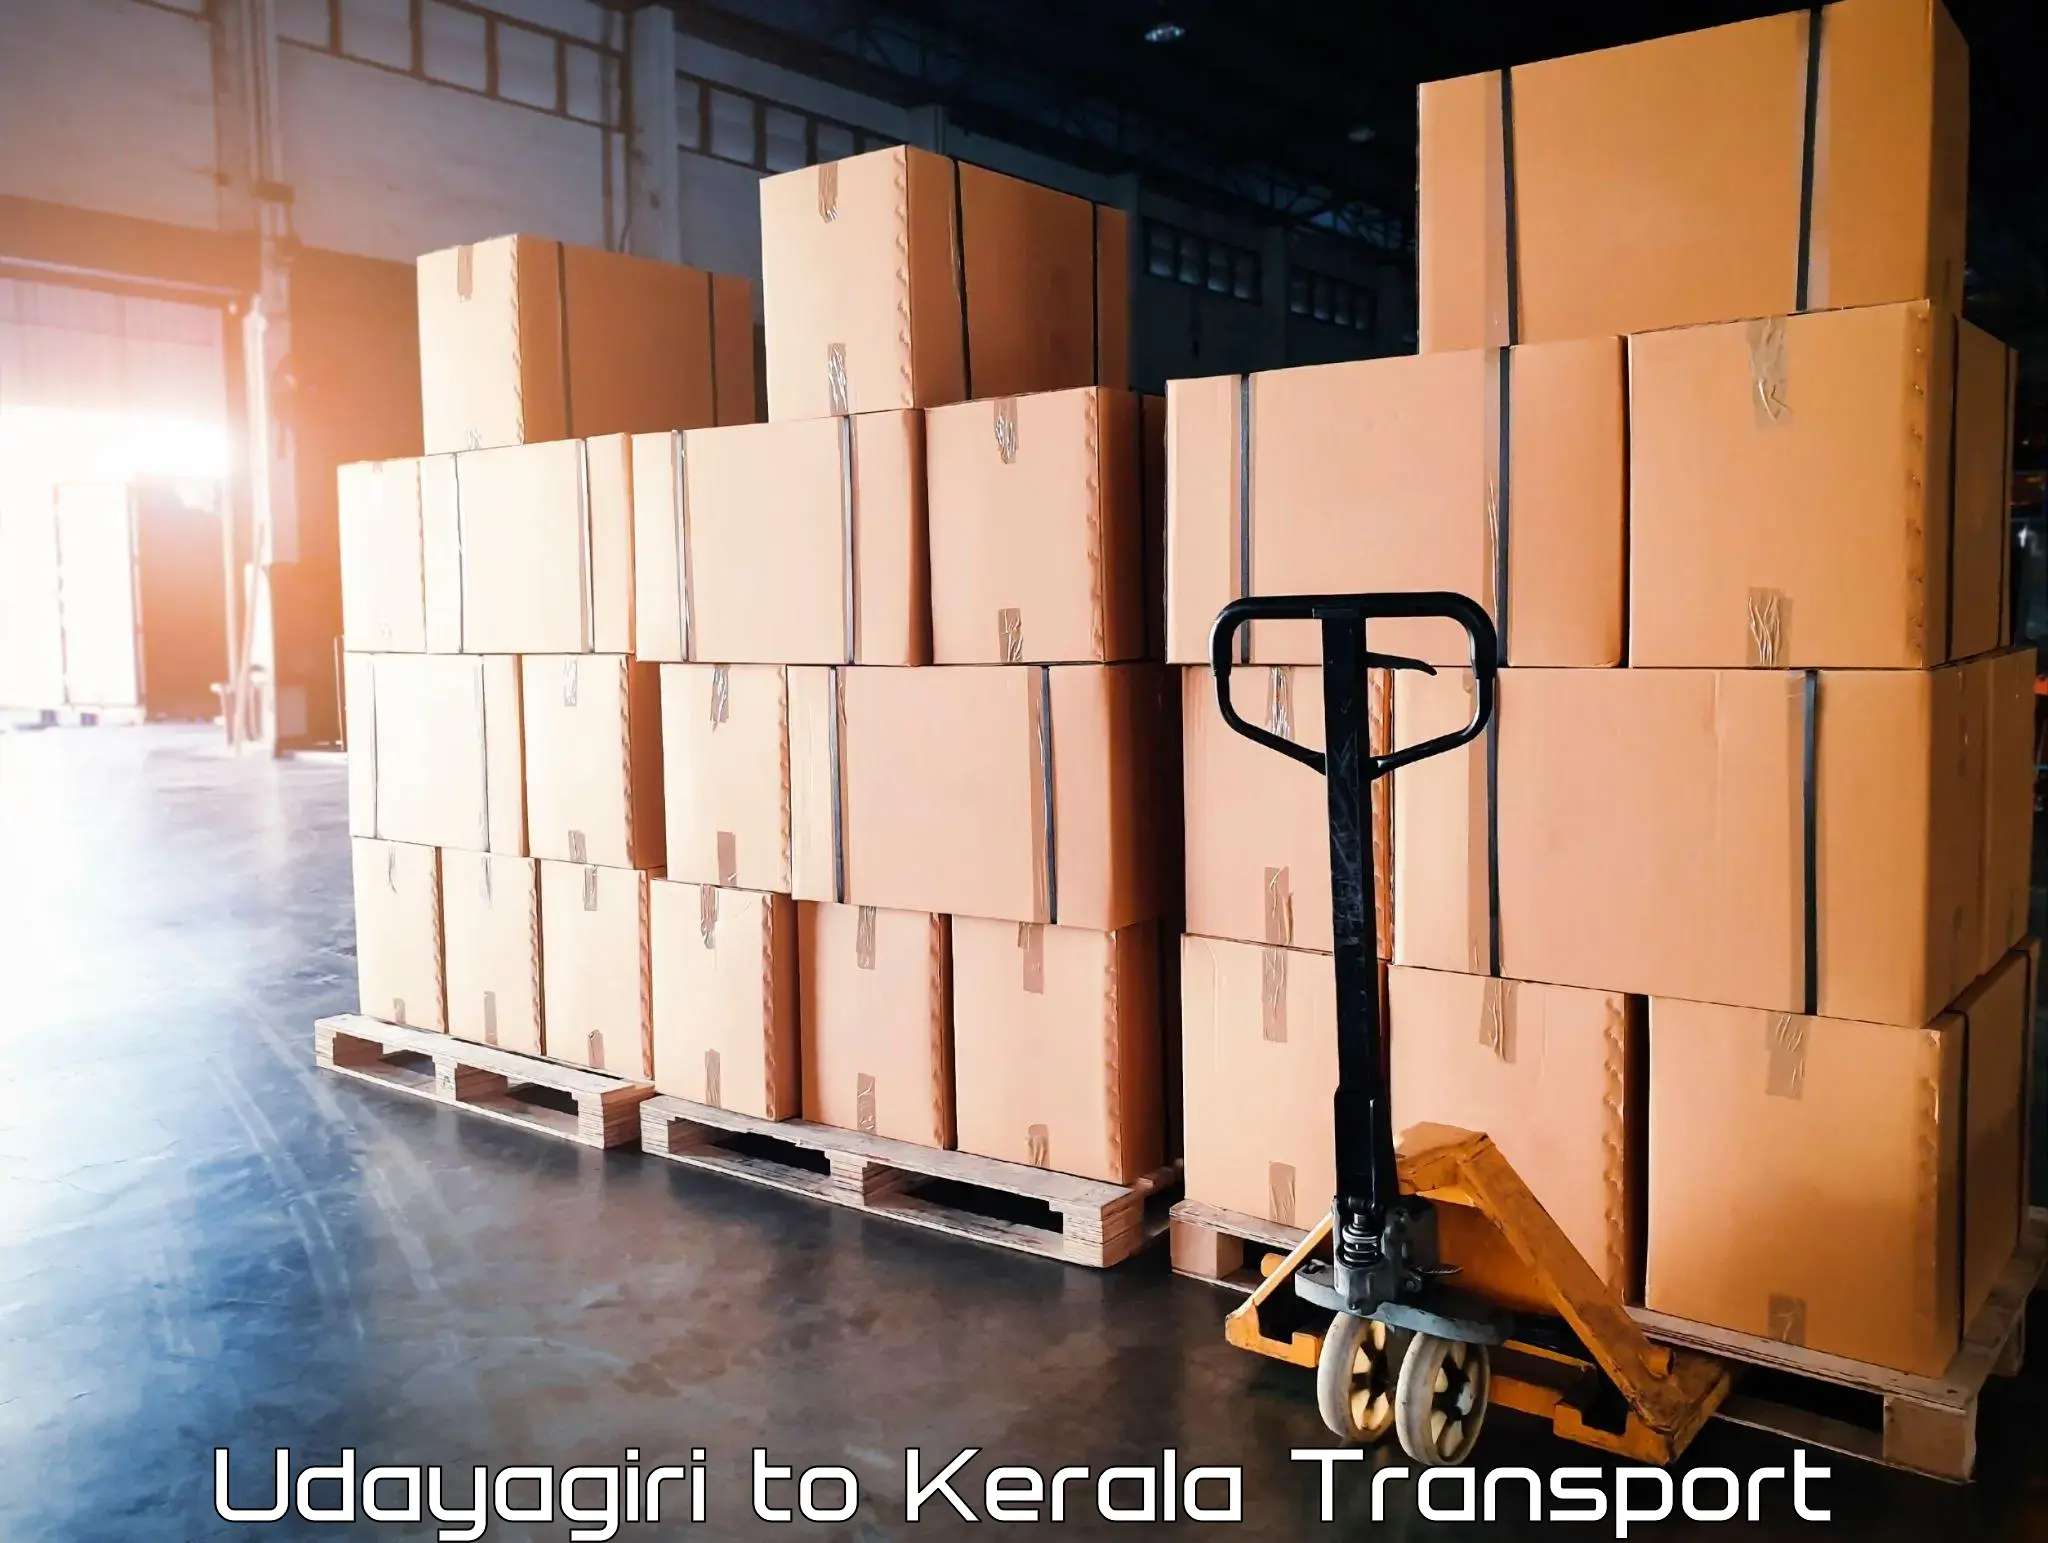 Transport bike from one state to another Udayagiri to Kothanalloor